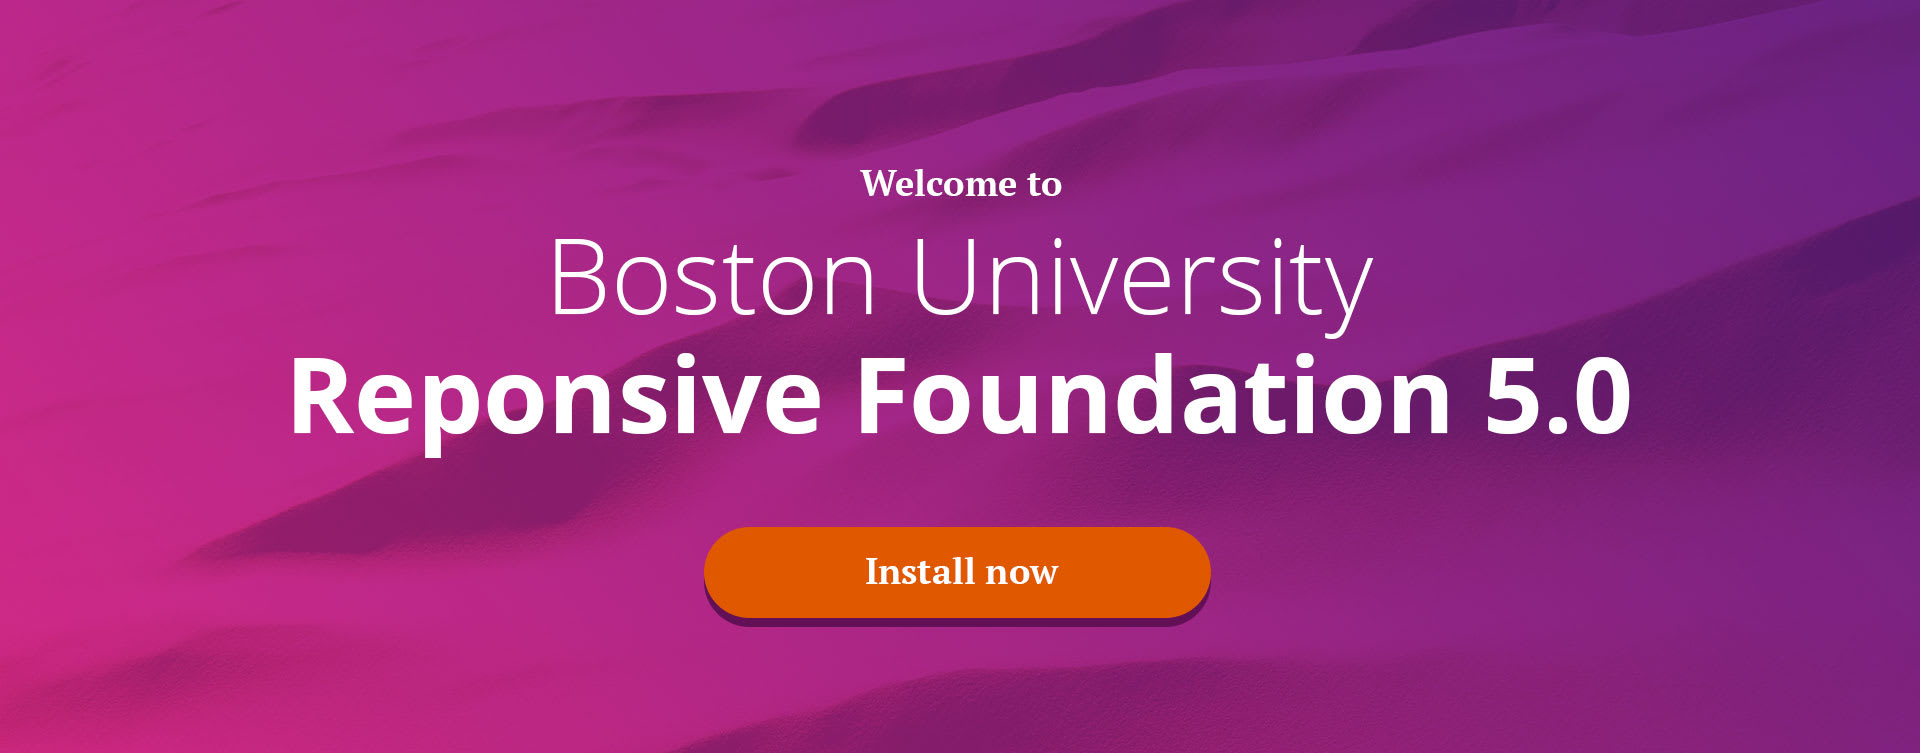 Welcome to Boston University Responsive Foundation 5.0. Install now